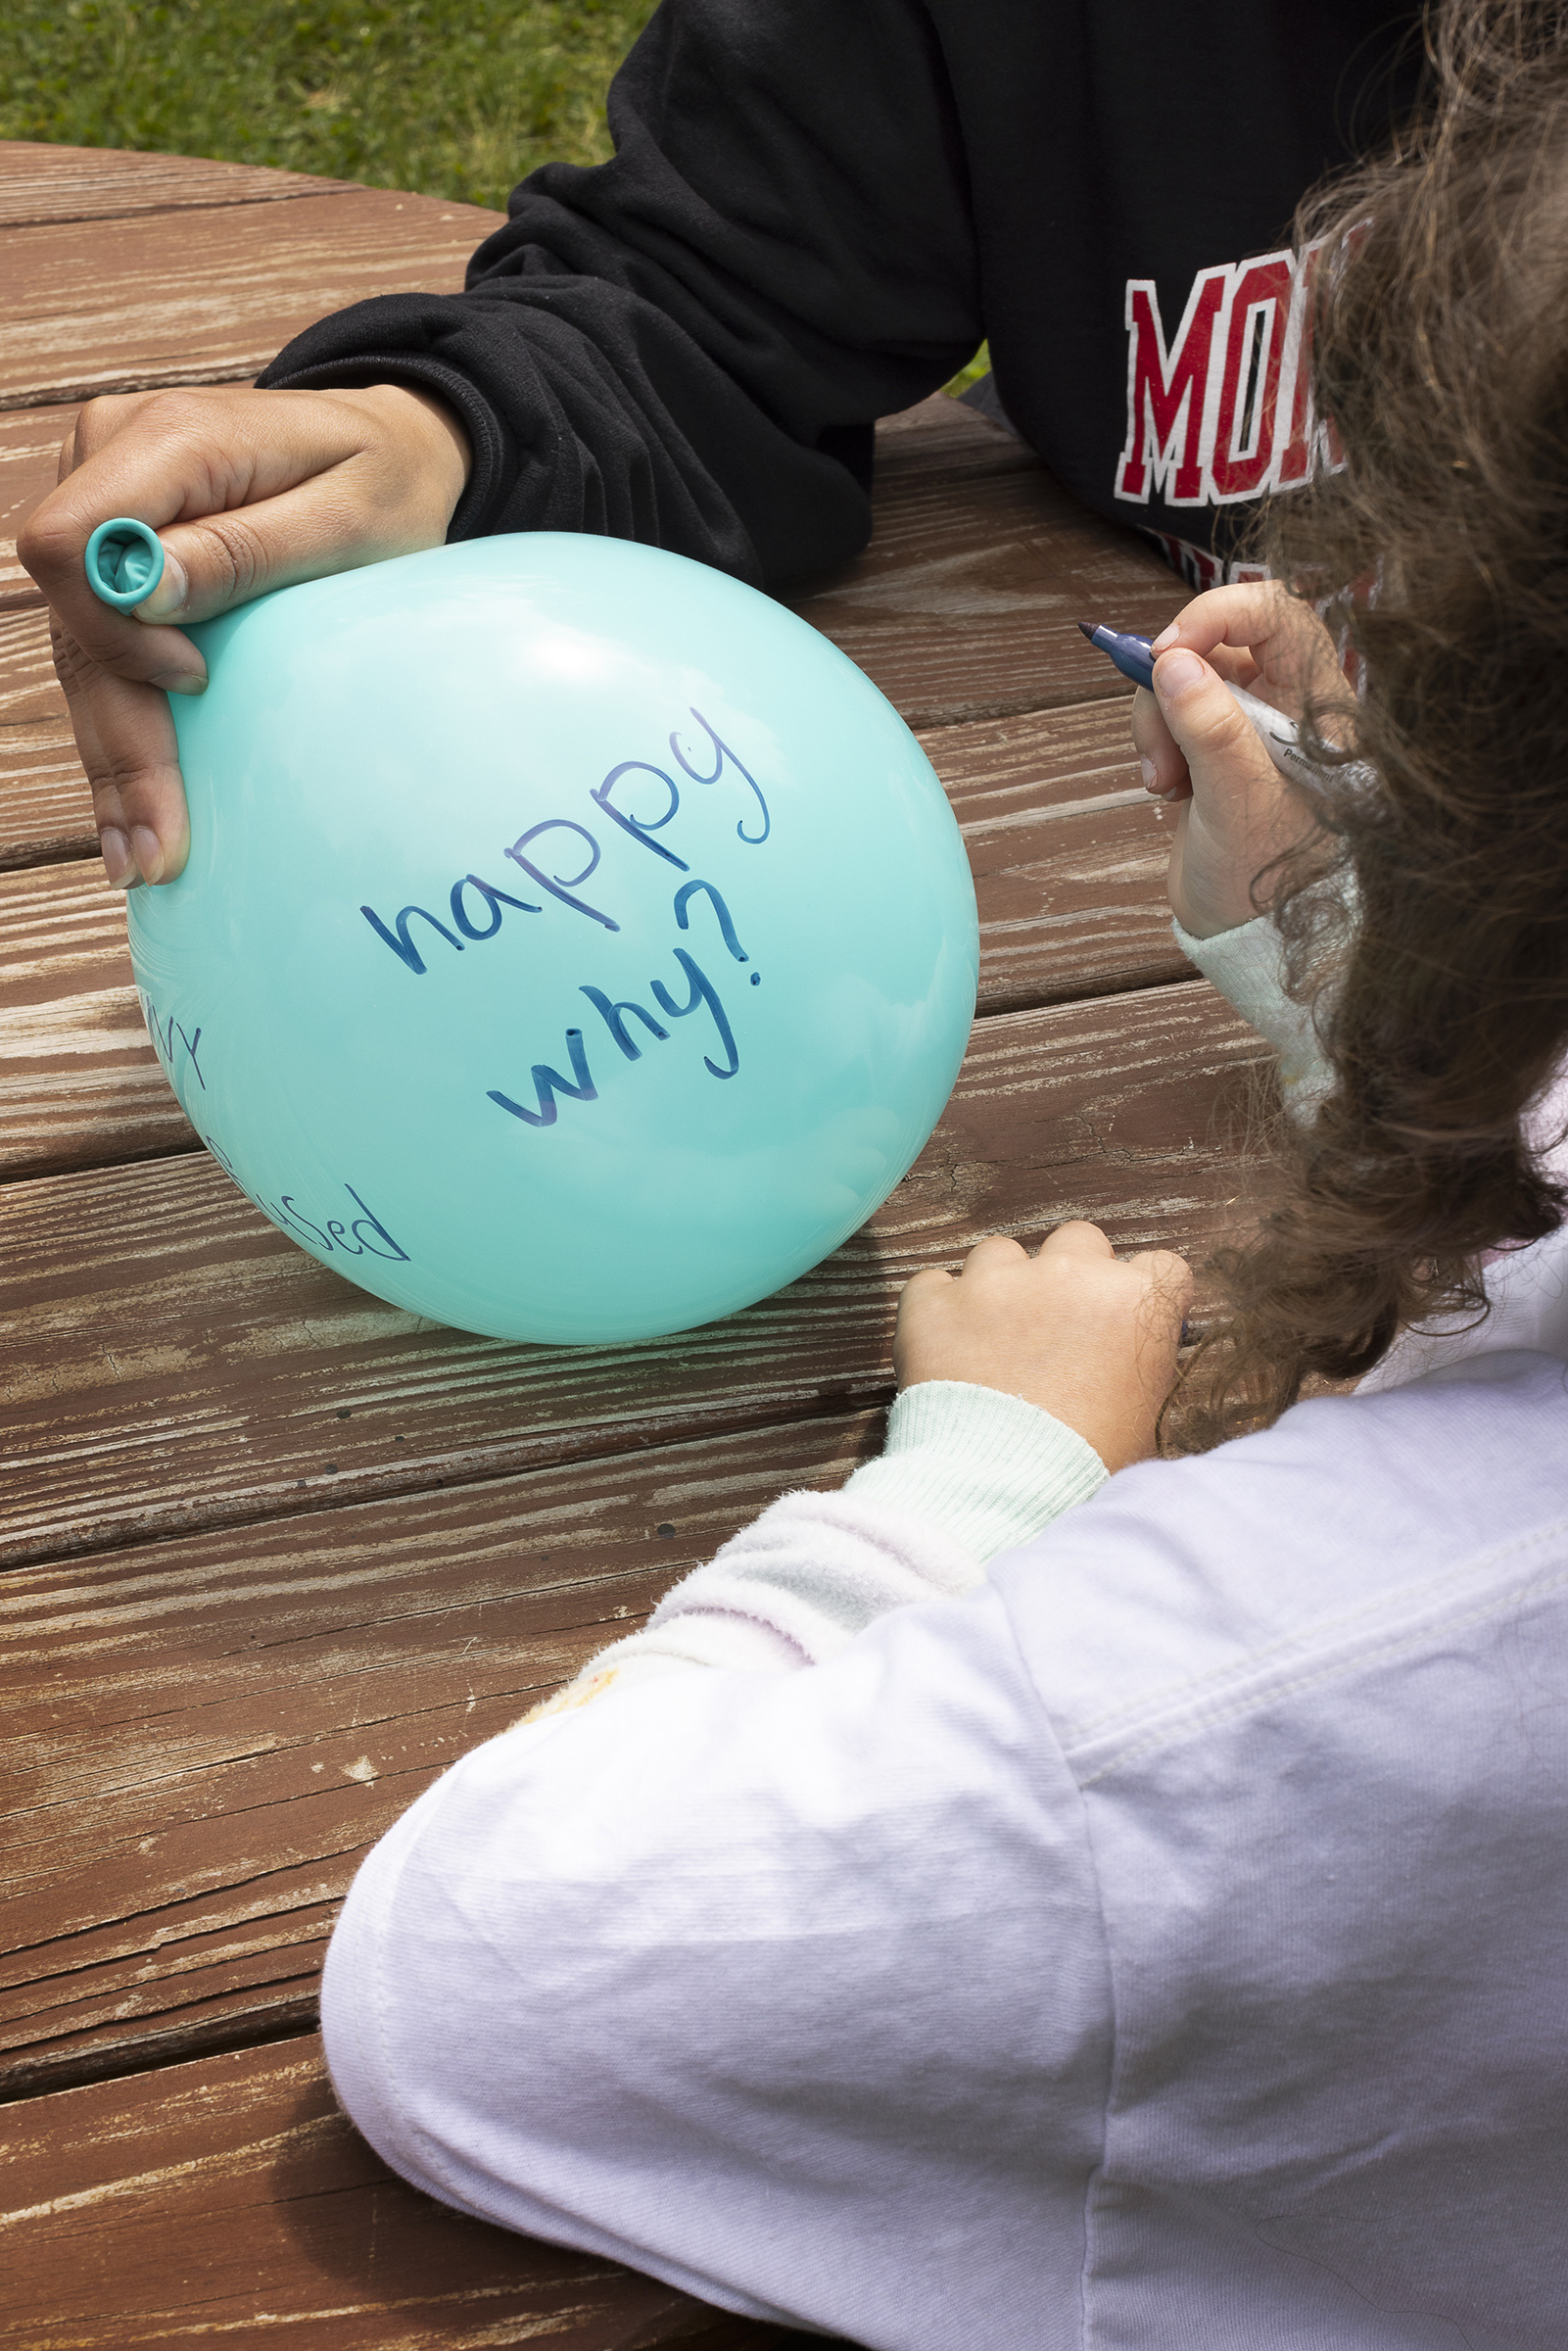 A camper writes on a balloon during a healing-circle exercise.